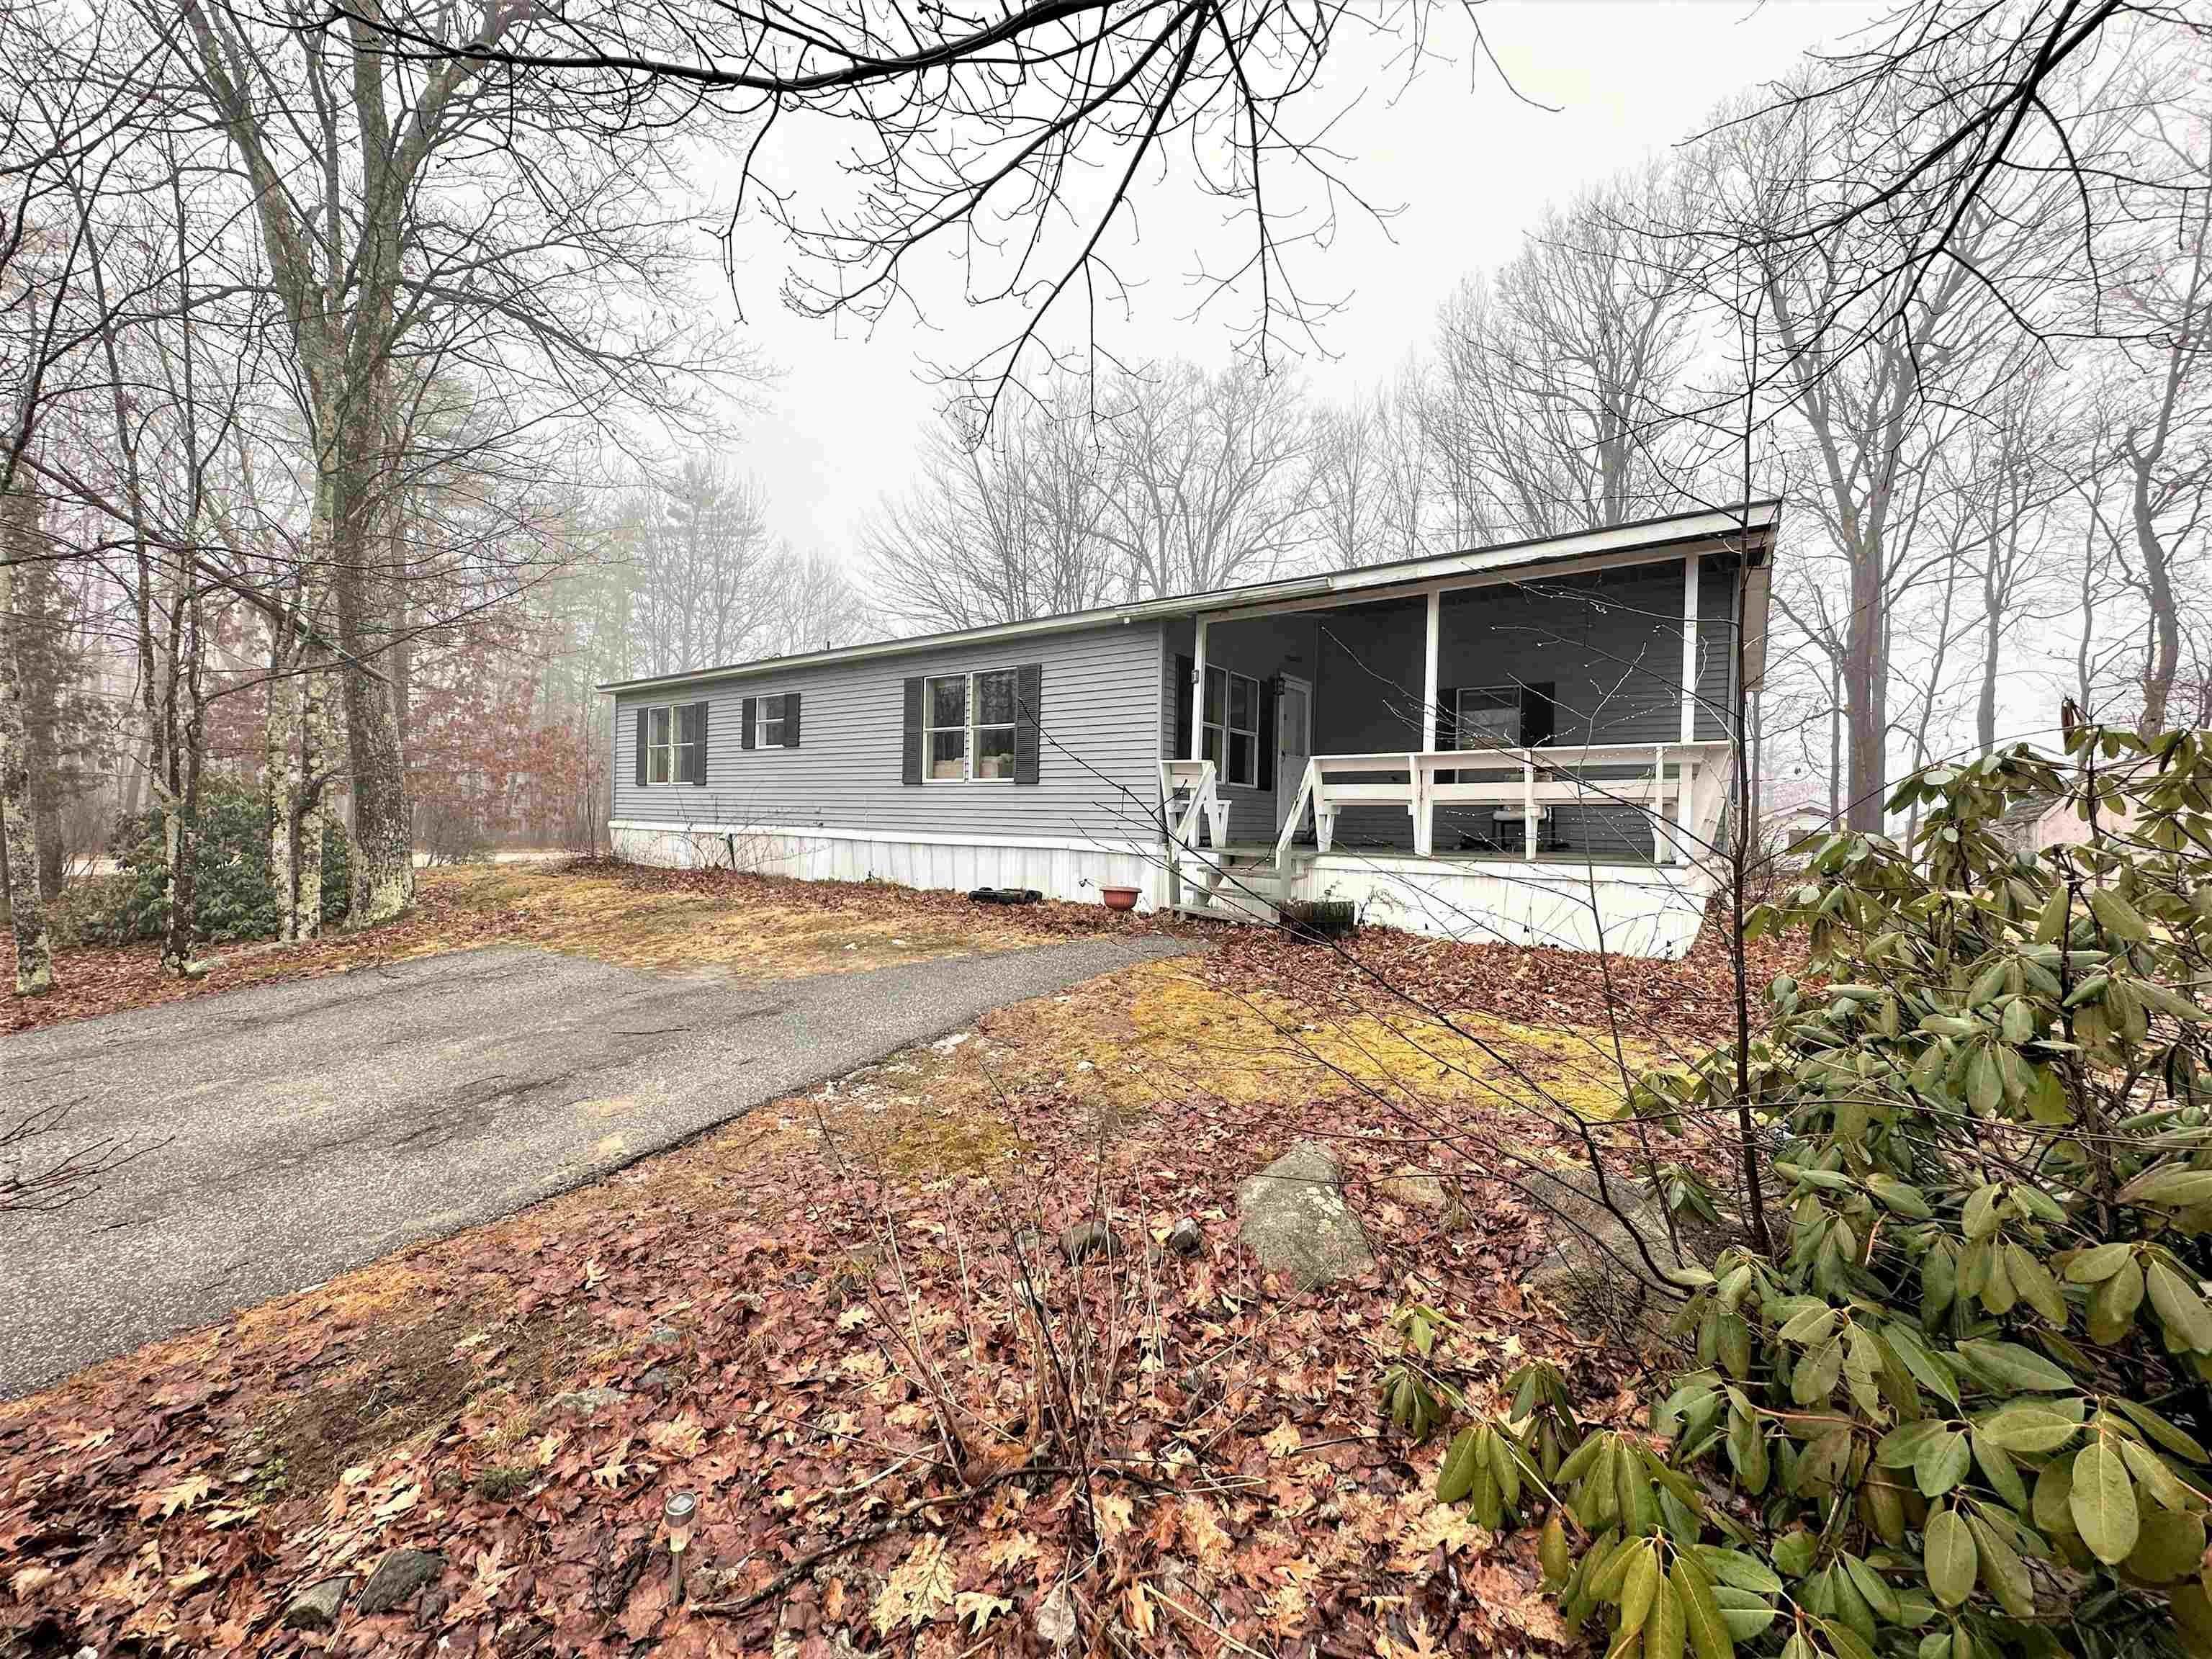 1. Mobile Homes for Sale at Loudon, NH 03307